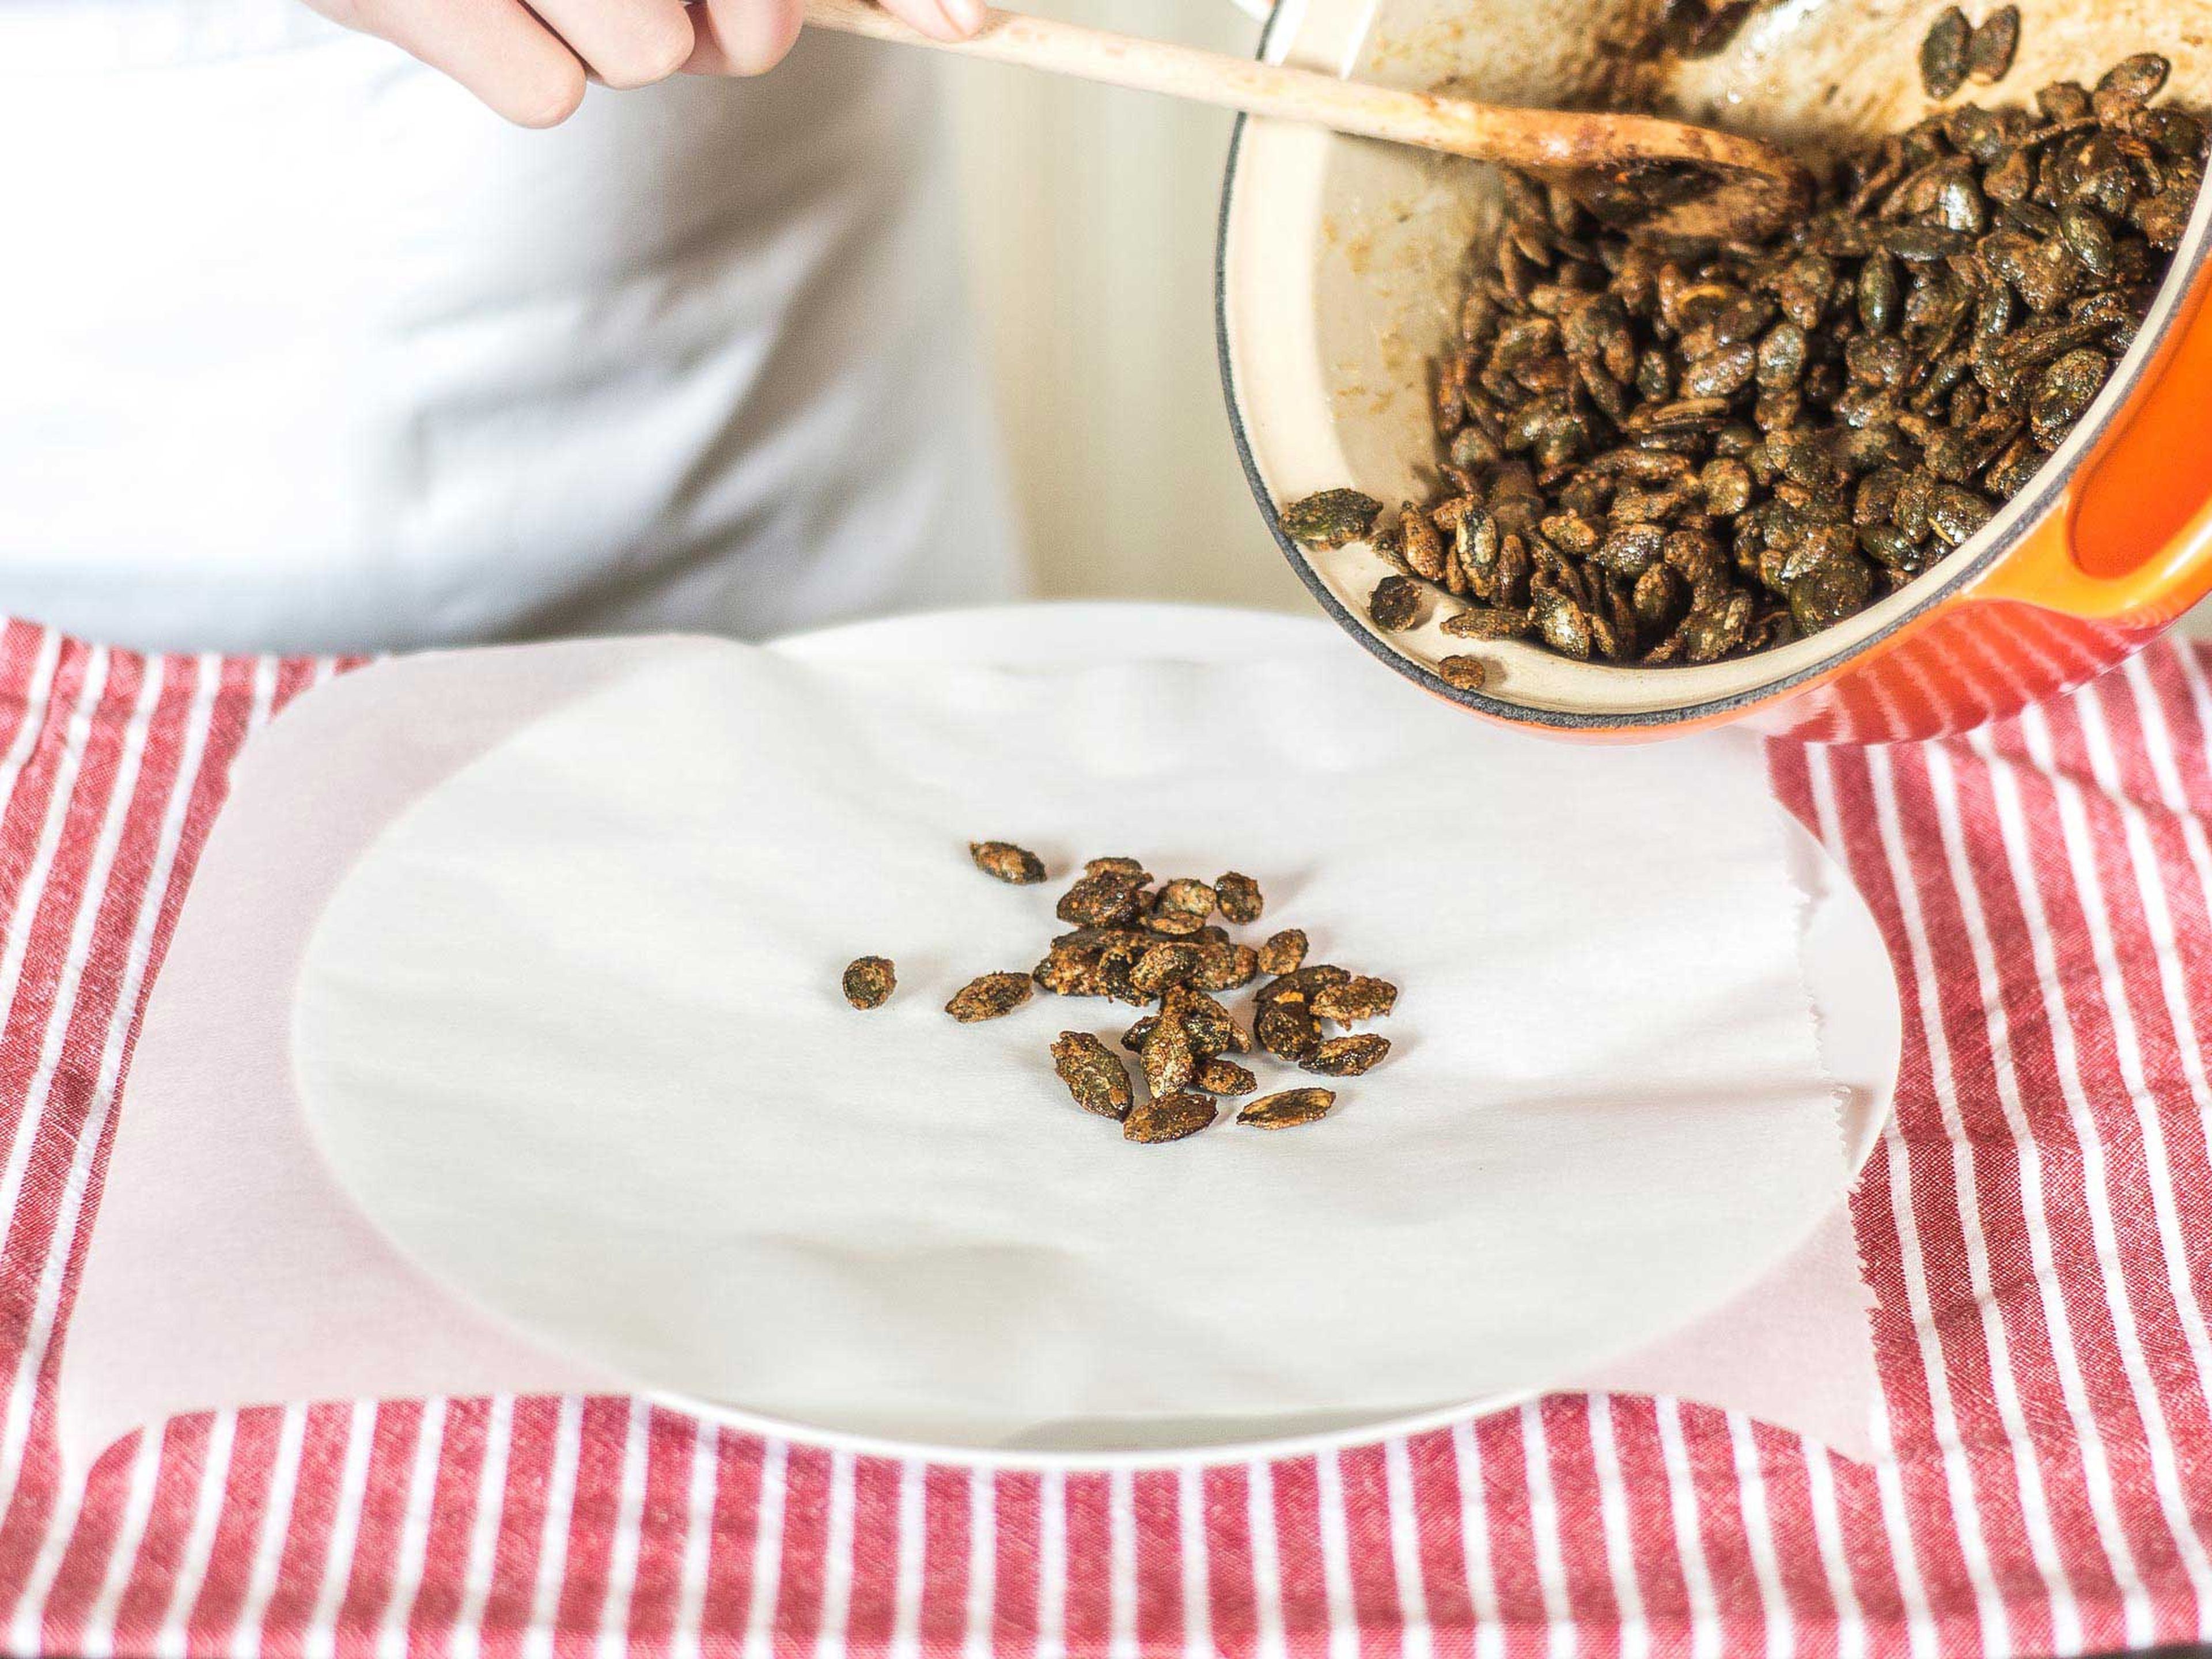 Place the candied pumpkin seeds on a sheet of parchment paper to cool.